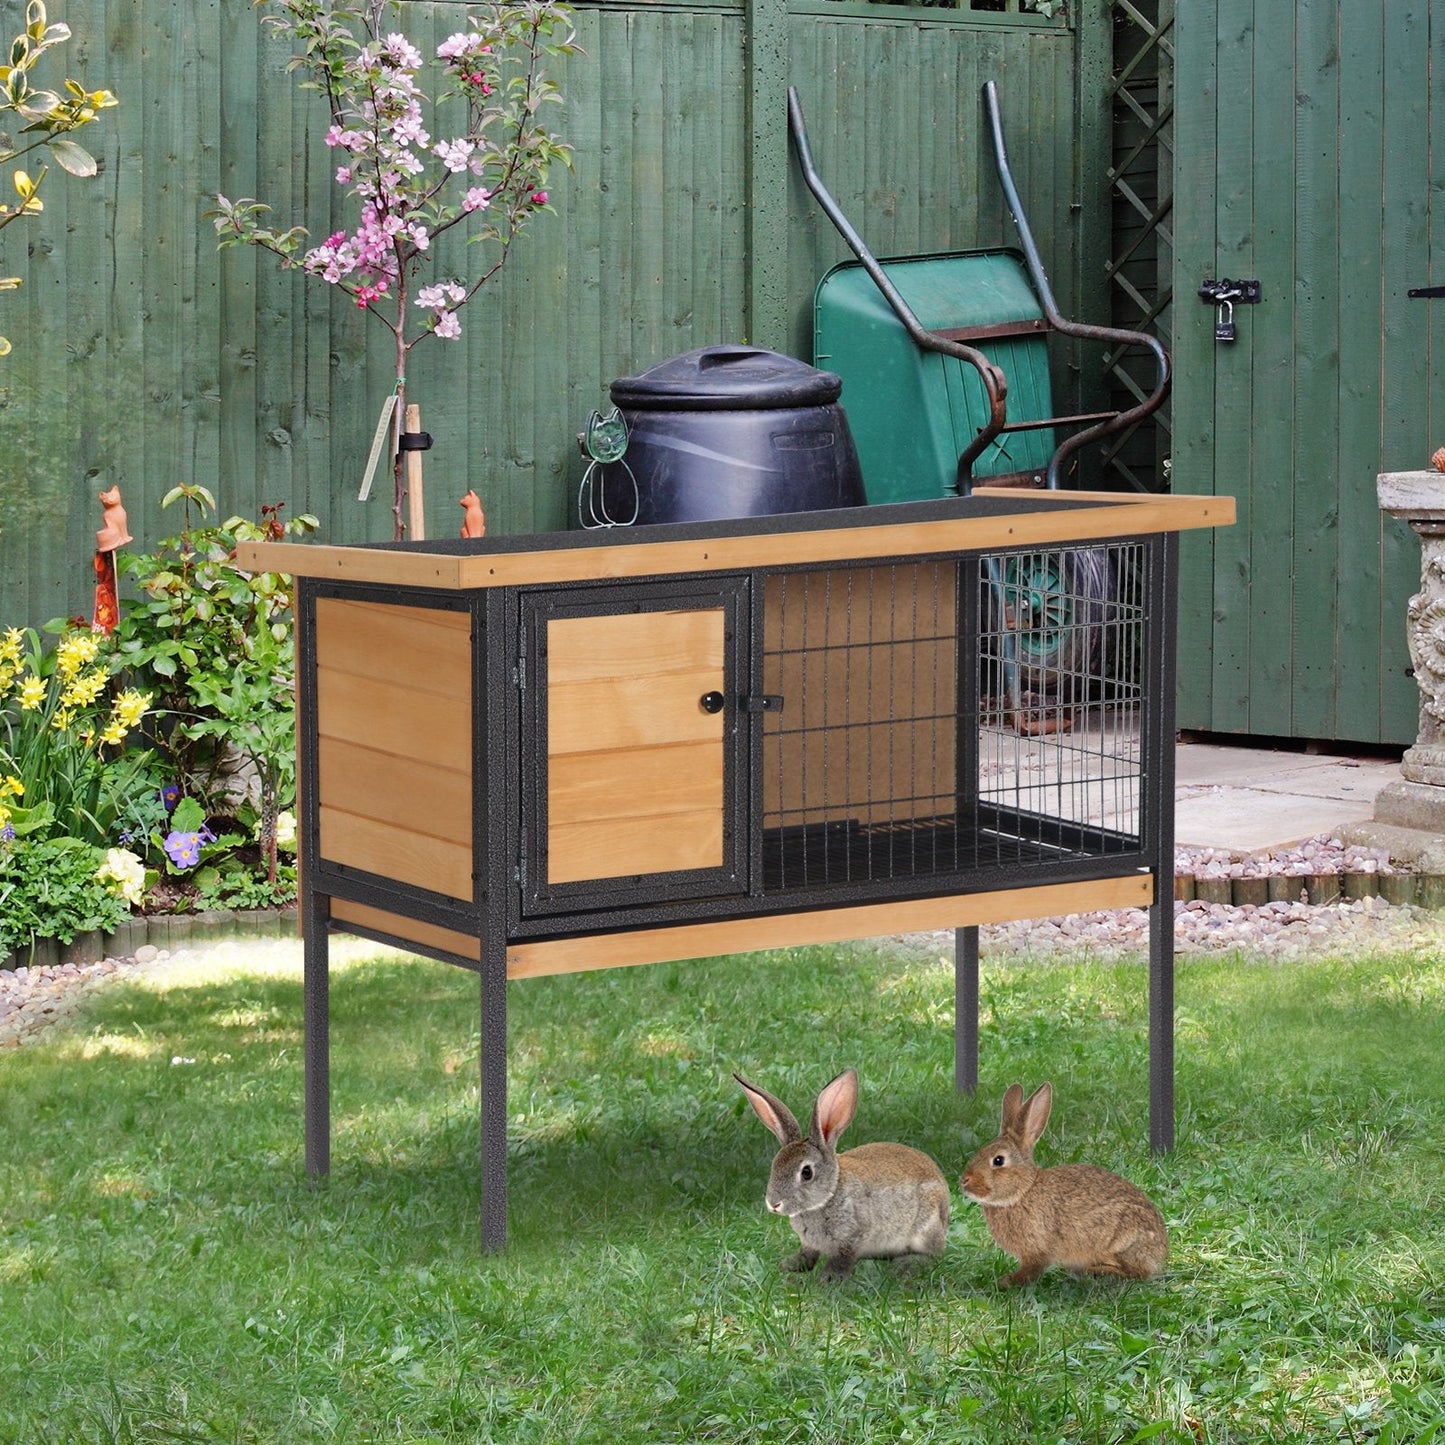 -PawHut Outdoor Rabbit Hutch, Wooden Elevated Pet House, Bunny Cage witn Removeable Tray, 36" L x 17.75" W x 27.5" H, for Small Animal, Natural - Outdoor Style Company